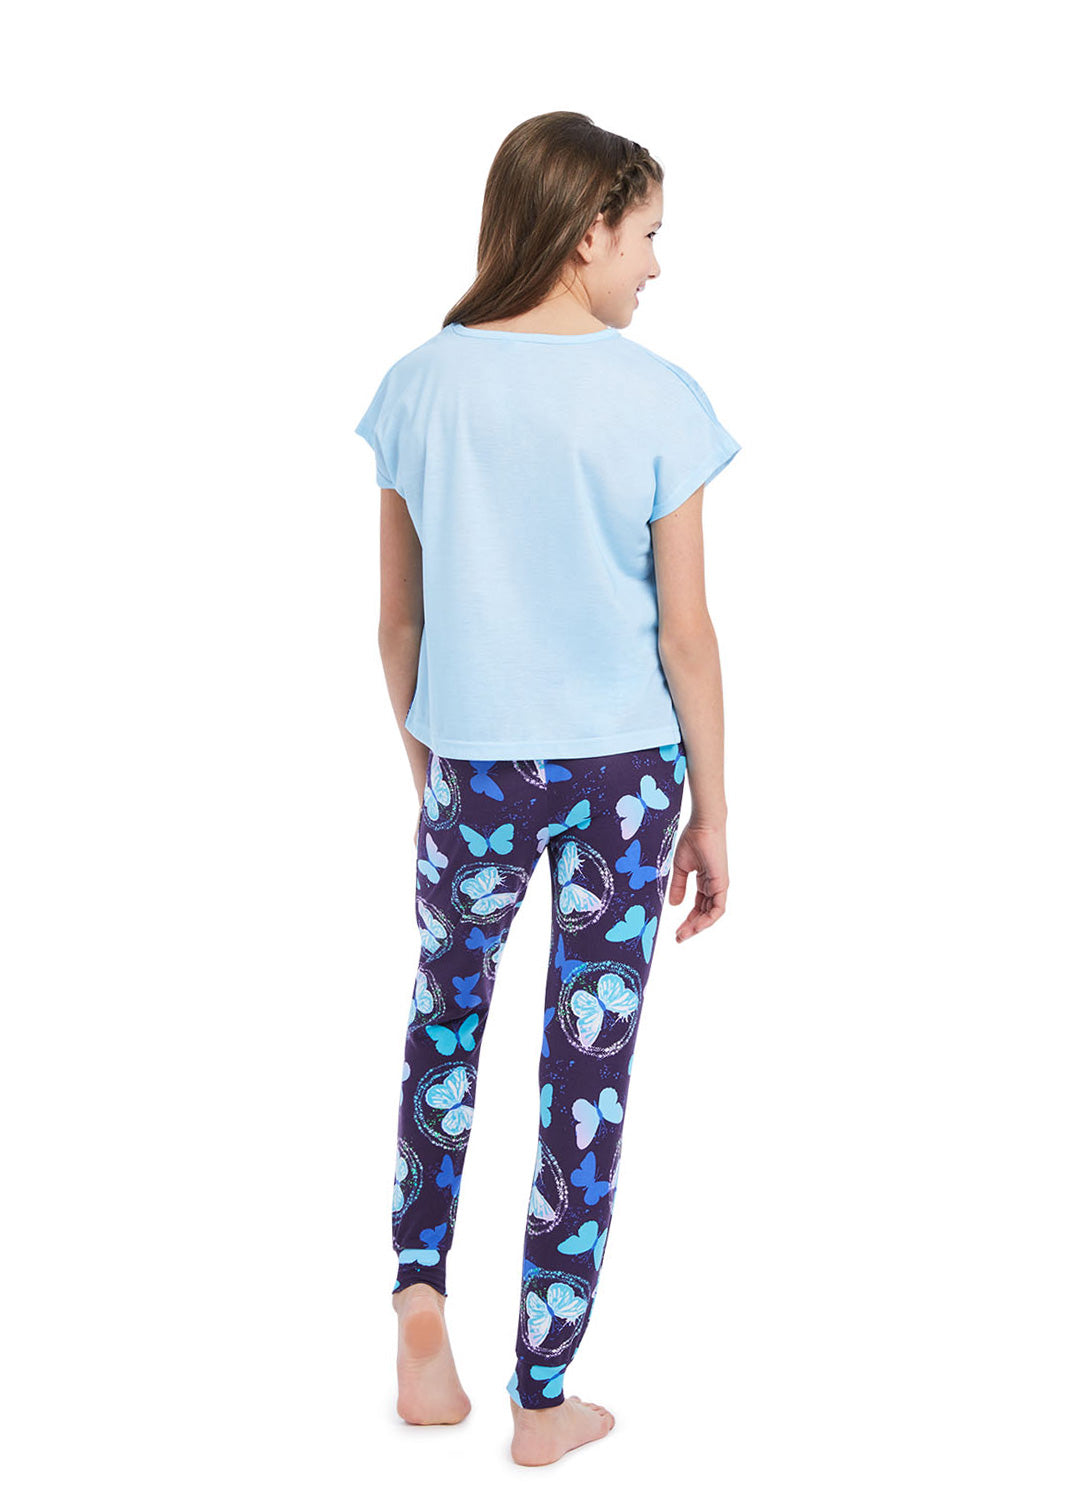 Back view Girl wearing Pj set Butterflies, t-shirt (blue) and pants (navy) with print